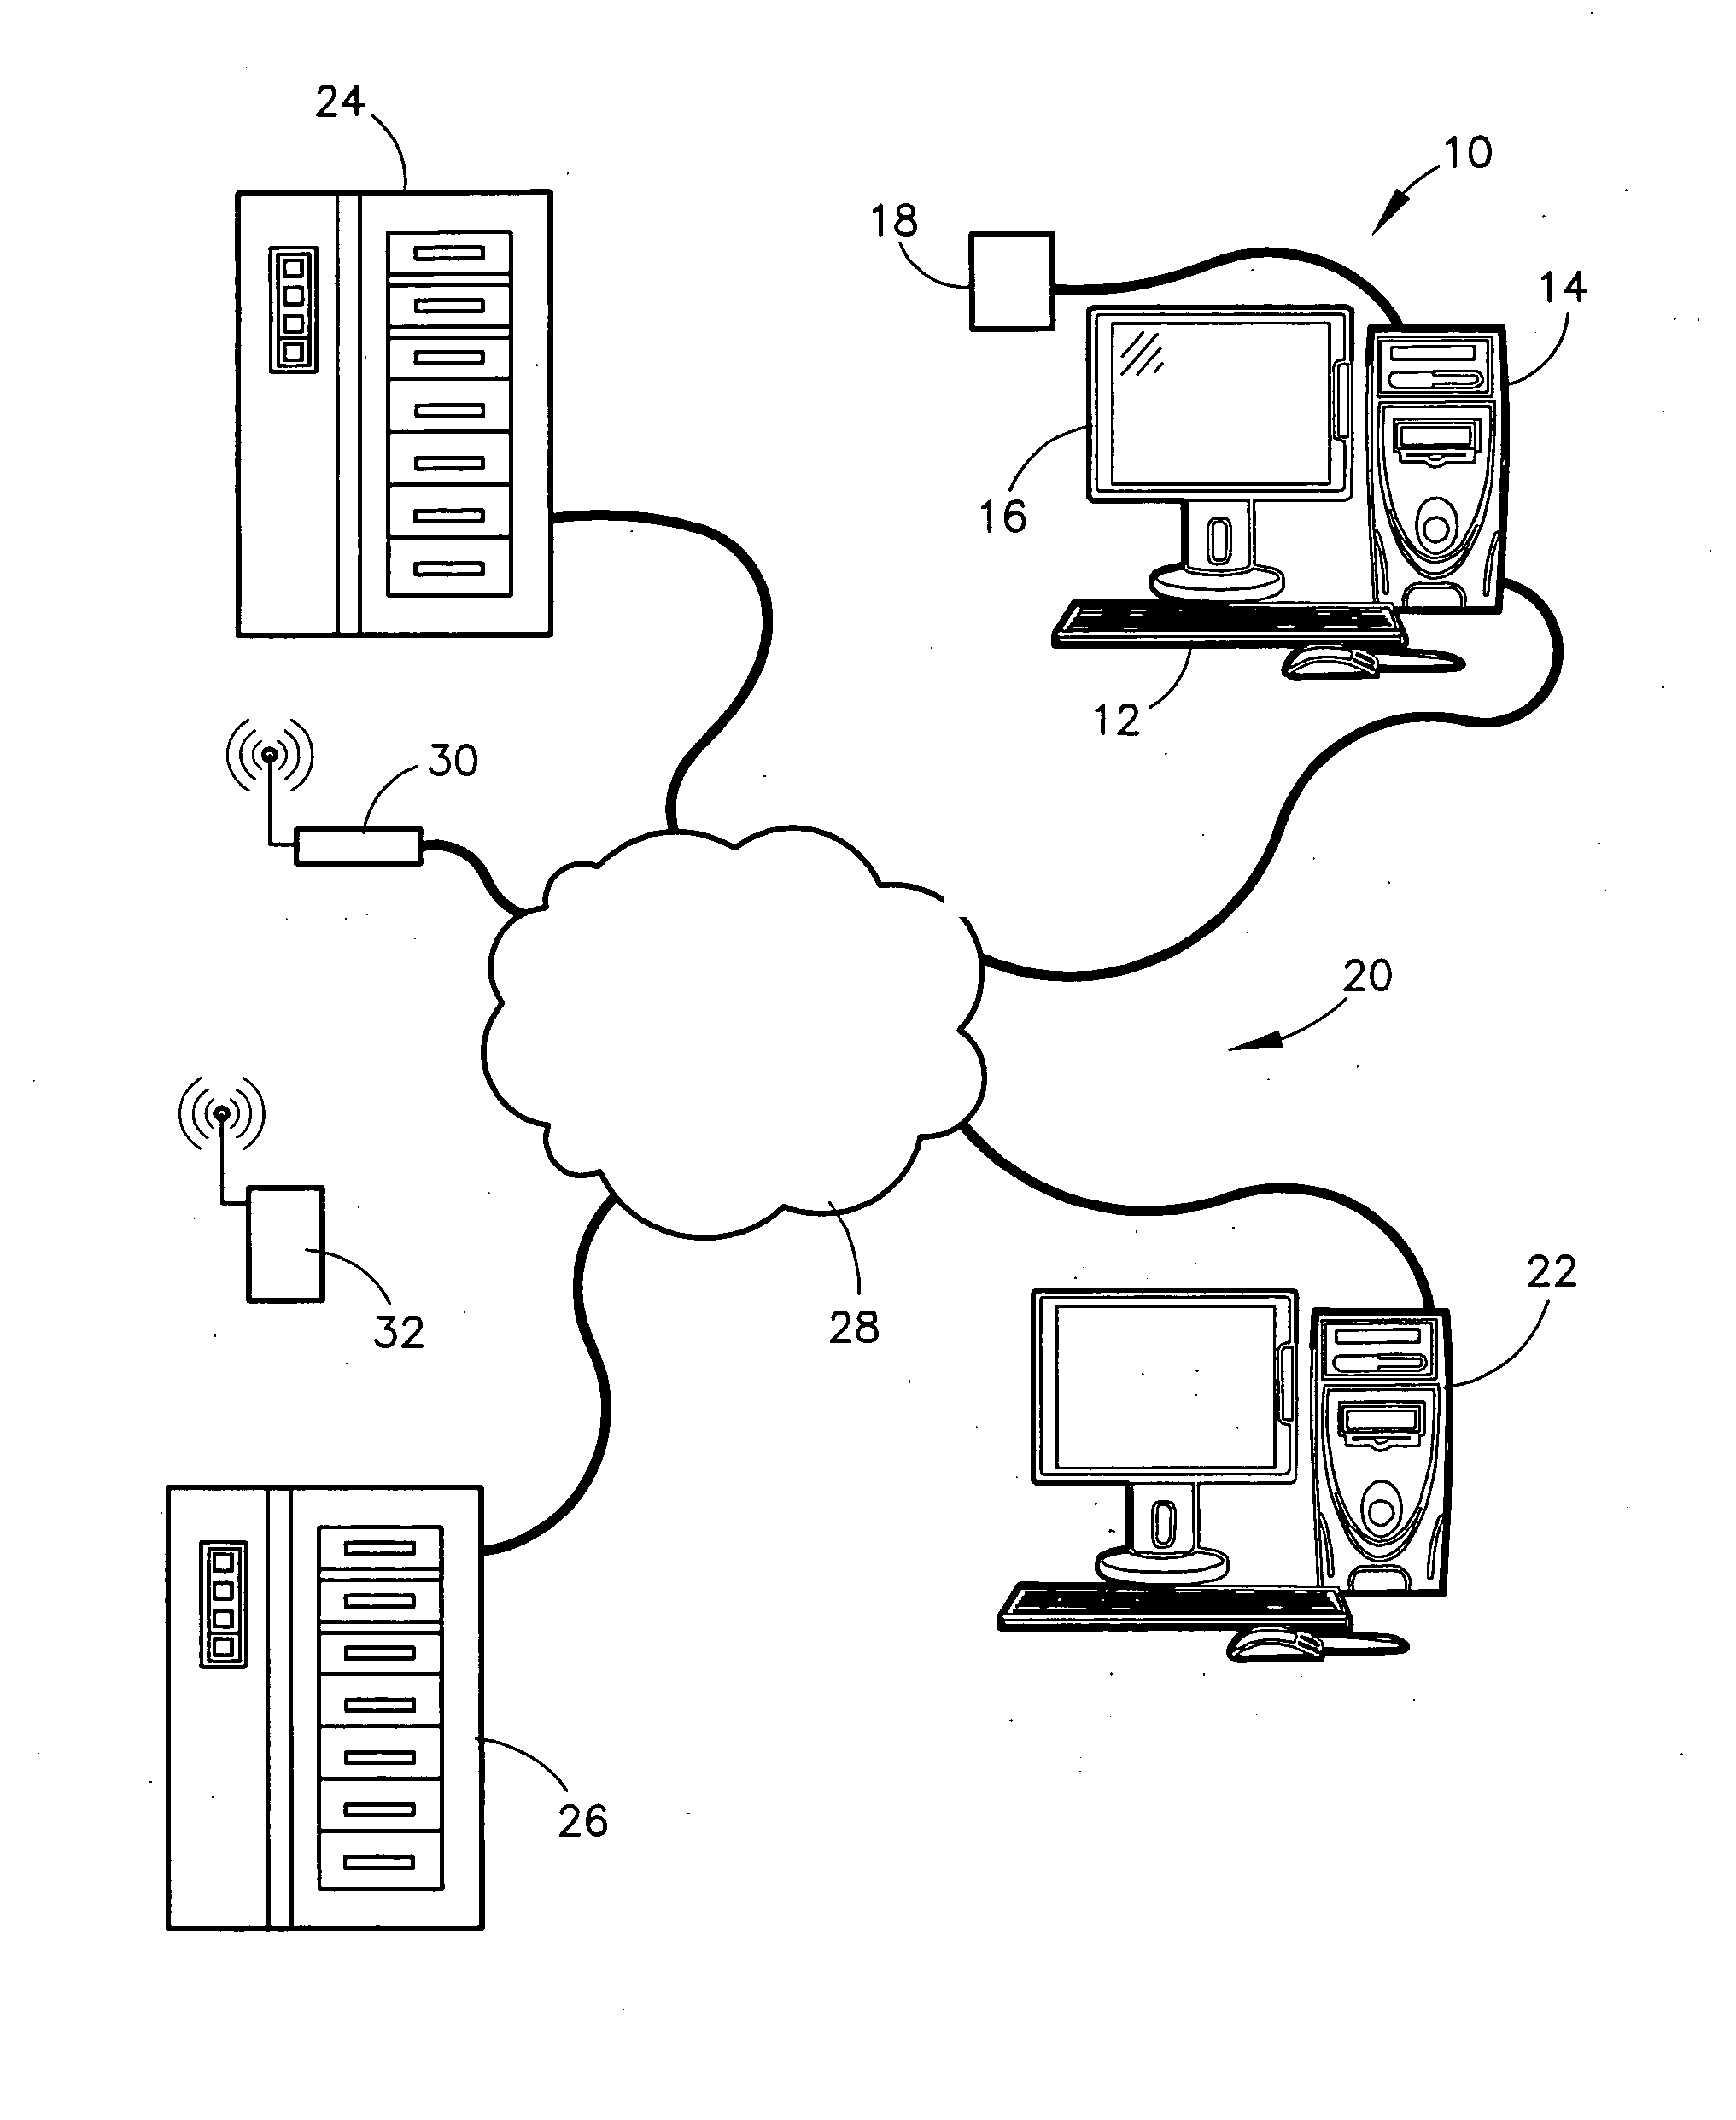 System and method for collecting, organizing, and presenting patient-oriented medical information